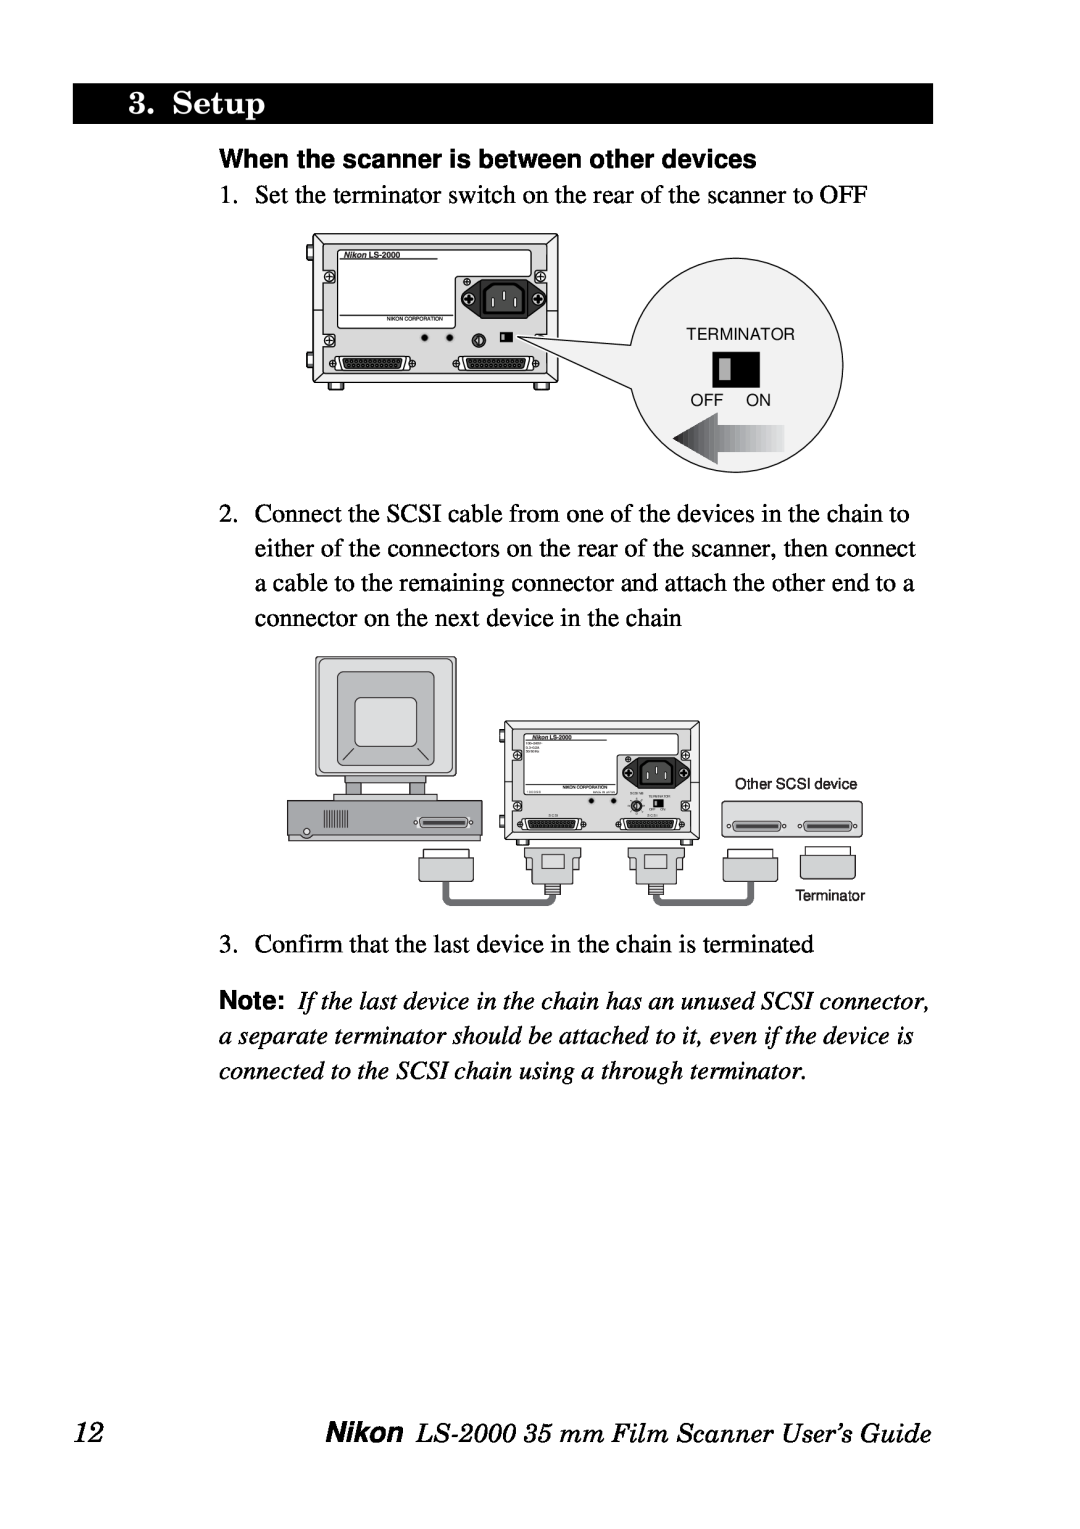 Nikon LS-2000 manual When the scanner is between other devices, Setup 